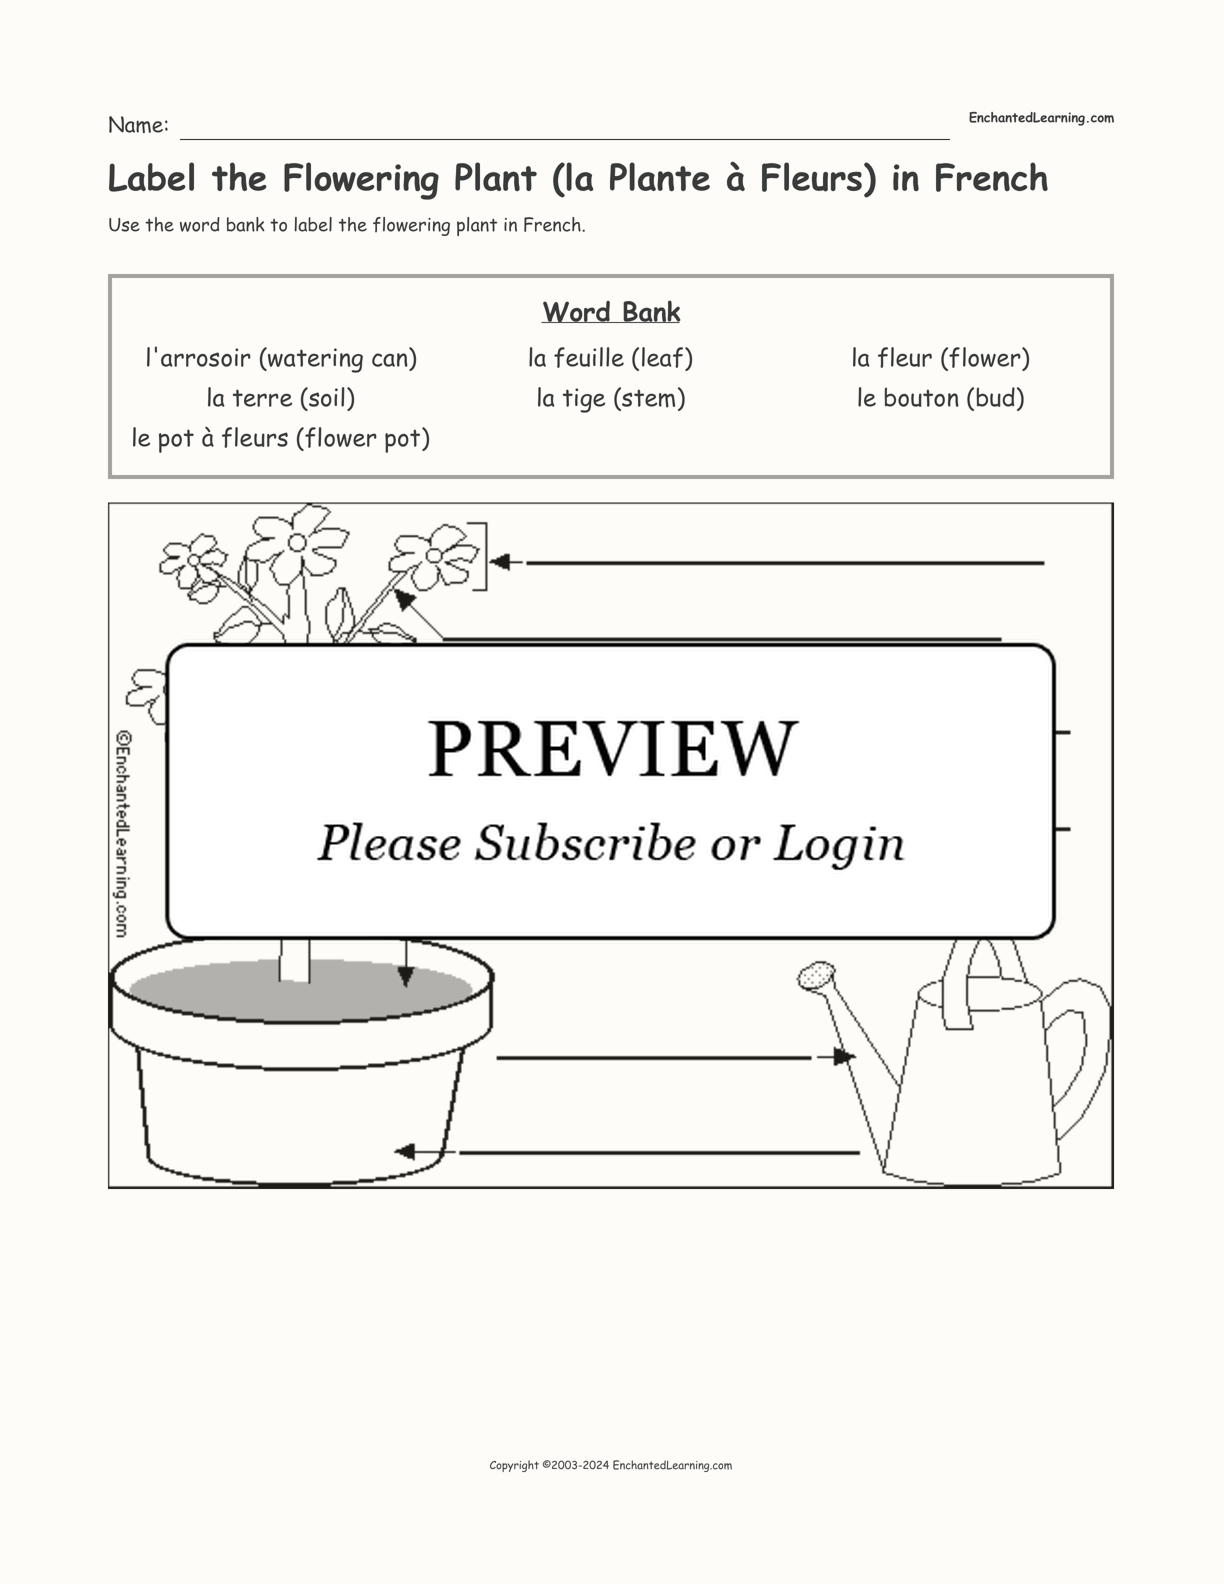 Label the Flowering Plant (la Plante à Fleurs) in French interactive worksheet page 1